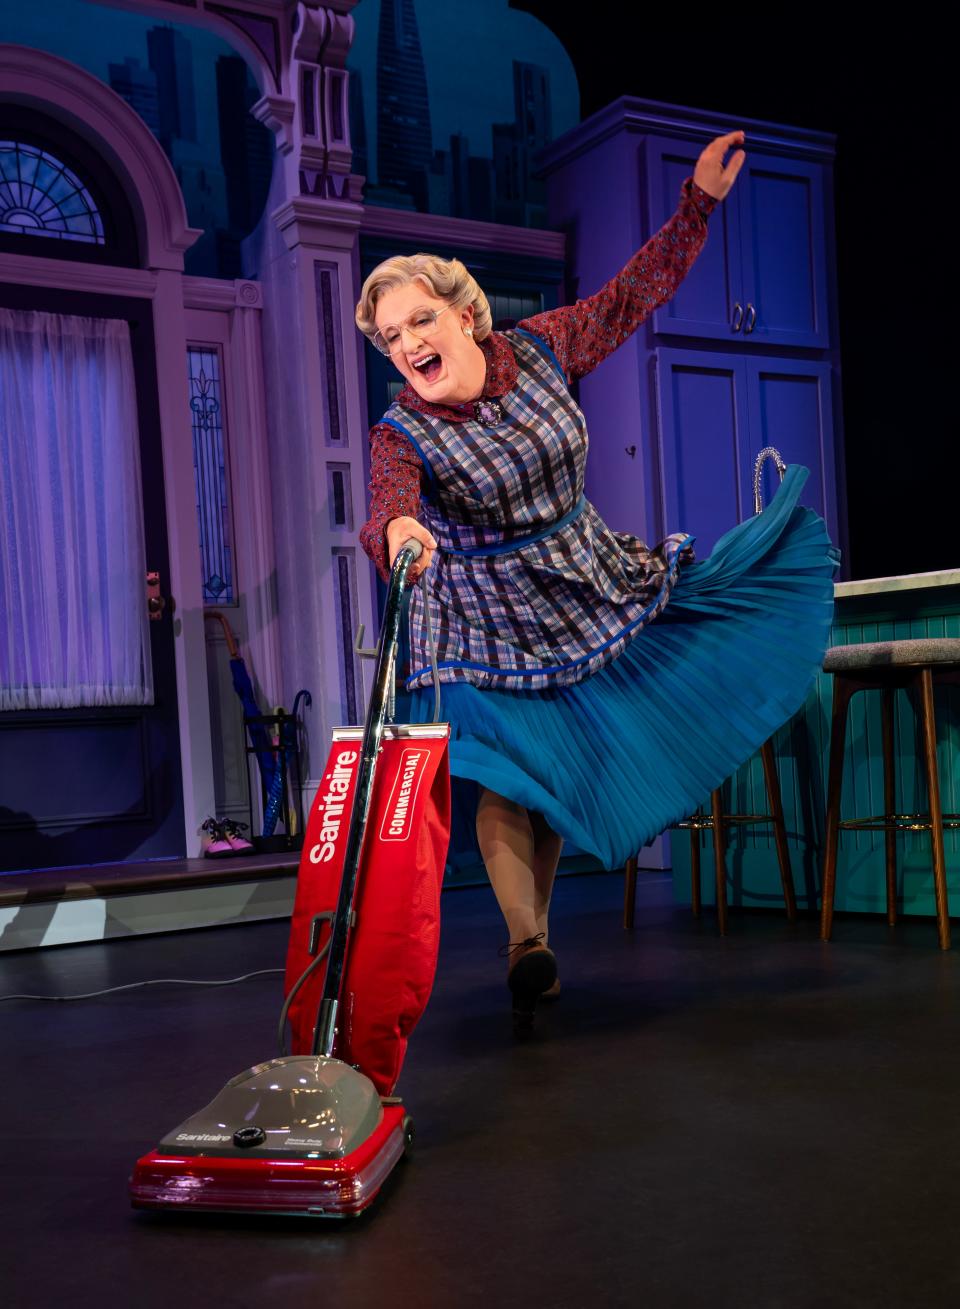 Rob McClure reprises his Broadway role as Euphegenia Doubtfire in the national tour of "Mrs. Doubtfire," at Providence Performing Arts Center from Oct. 17-22.